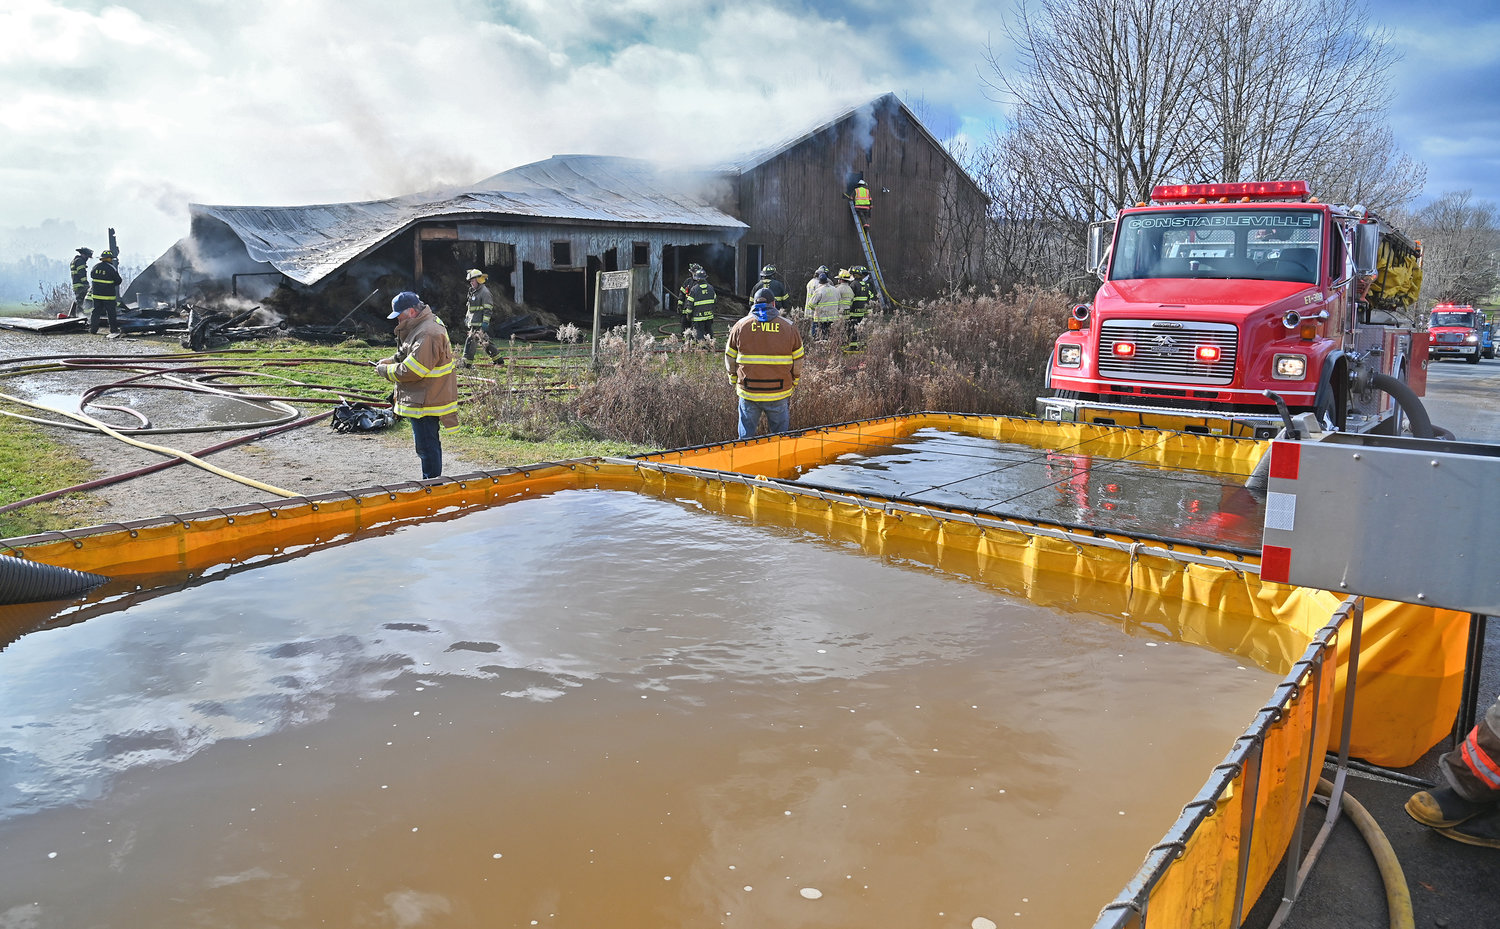 Firefighters from Boonville, Constableville, Westernville and West Leyden fire companies work a barn fire on Jackson Hill Road near the Merry Hill Road intersection in the Town of Ava Monday morning. Due to a lack of water, firefighters utilized portable water tankers and a nearby pond to battle the blaze.